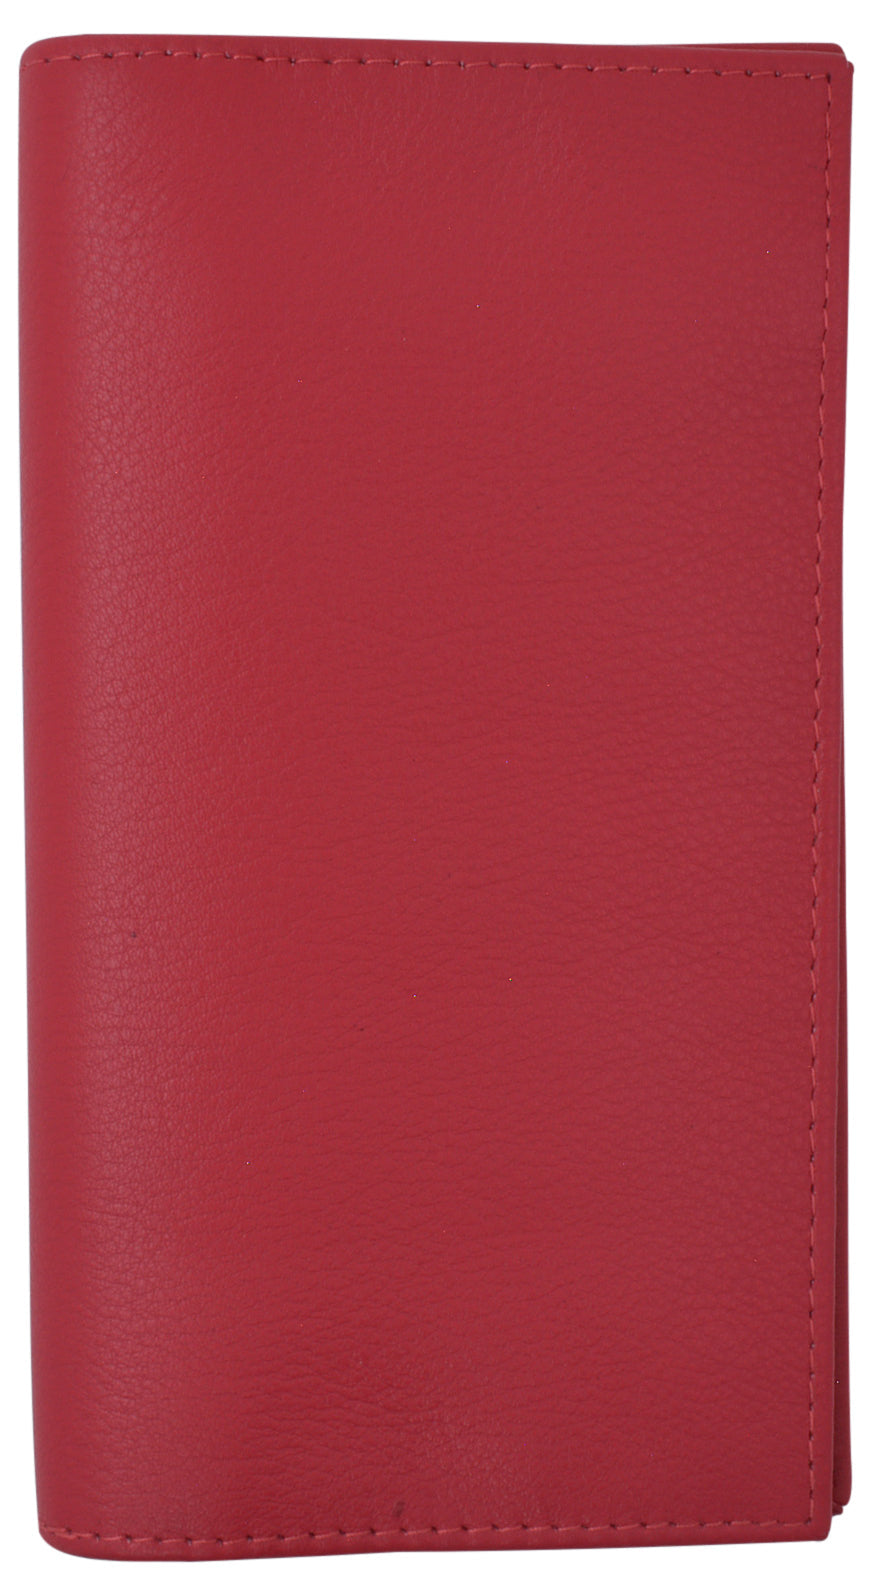 Basic Genuine Leather Checkbook Cover Colors Image 4